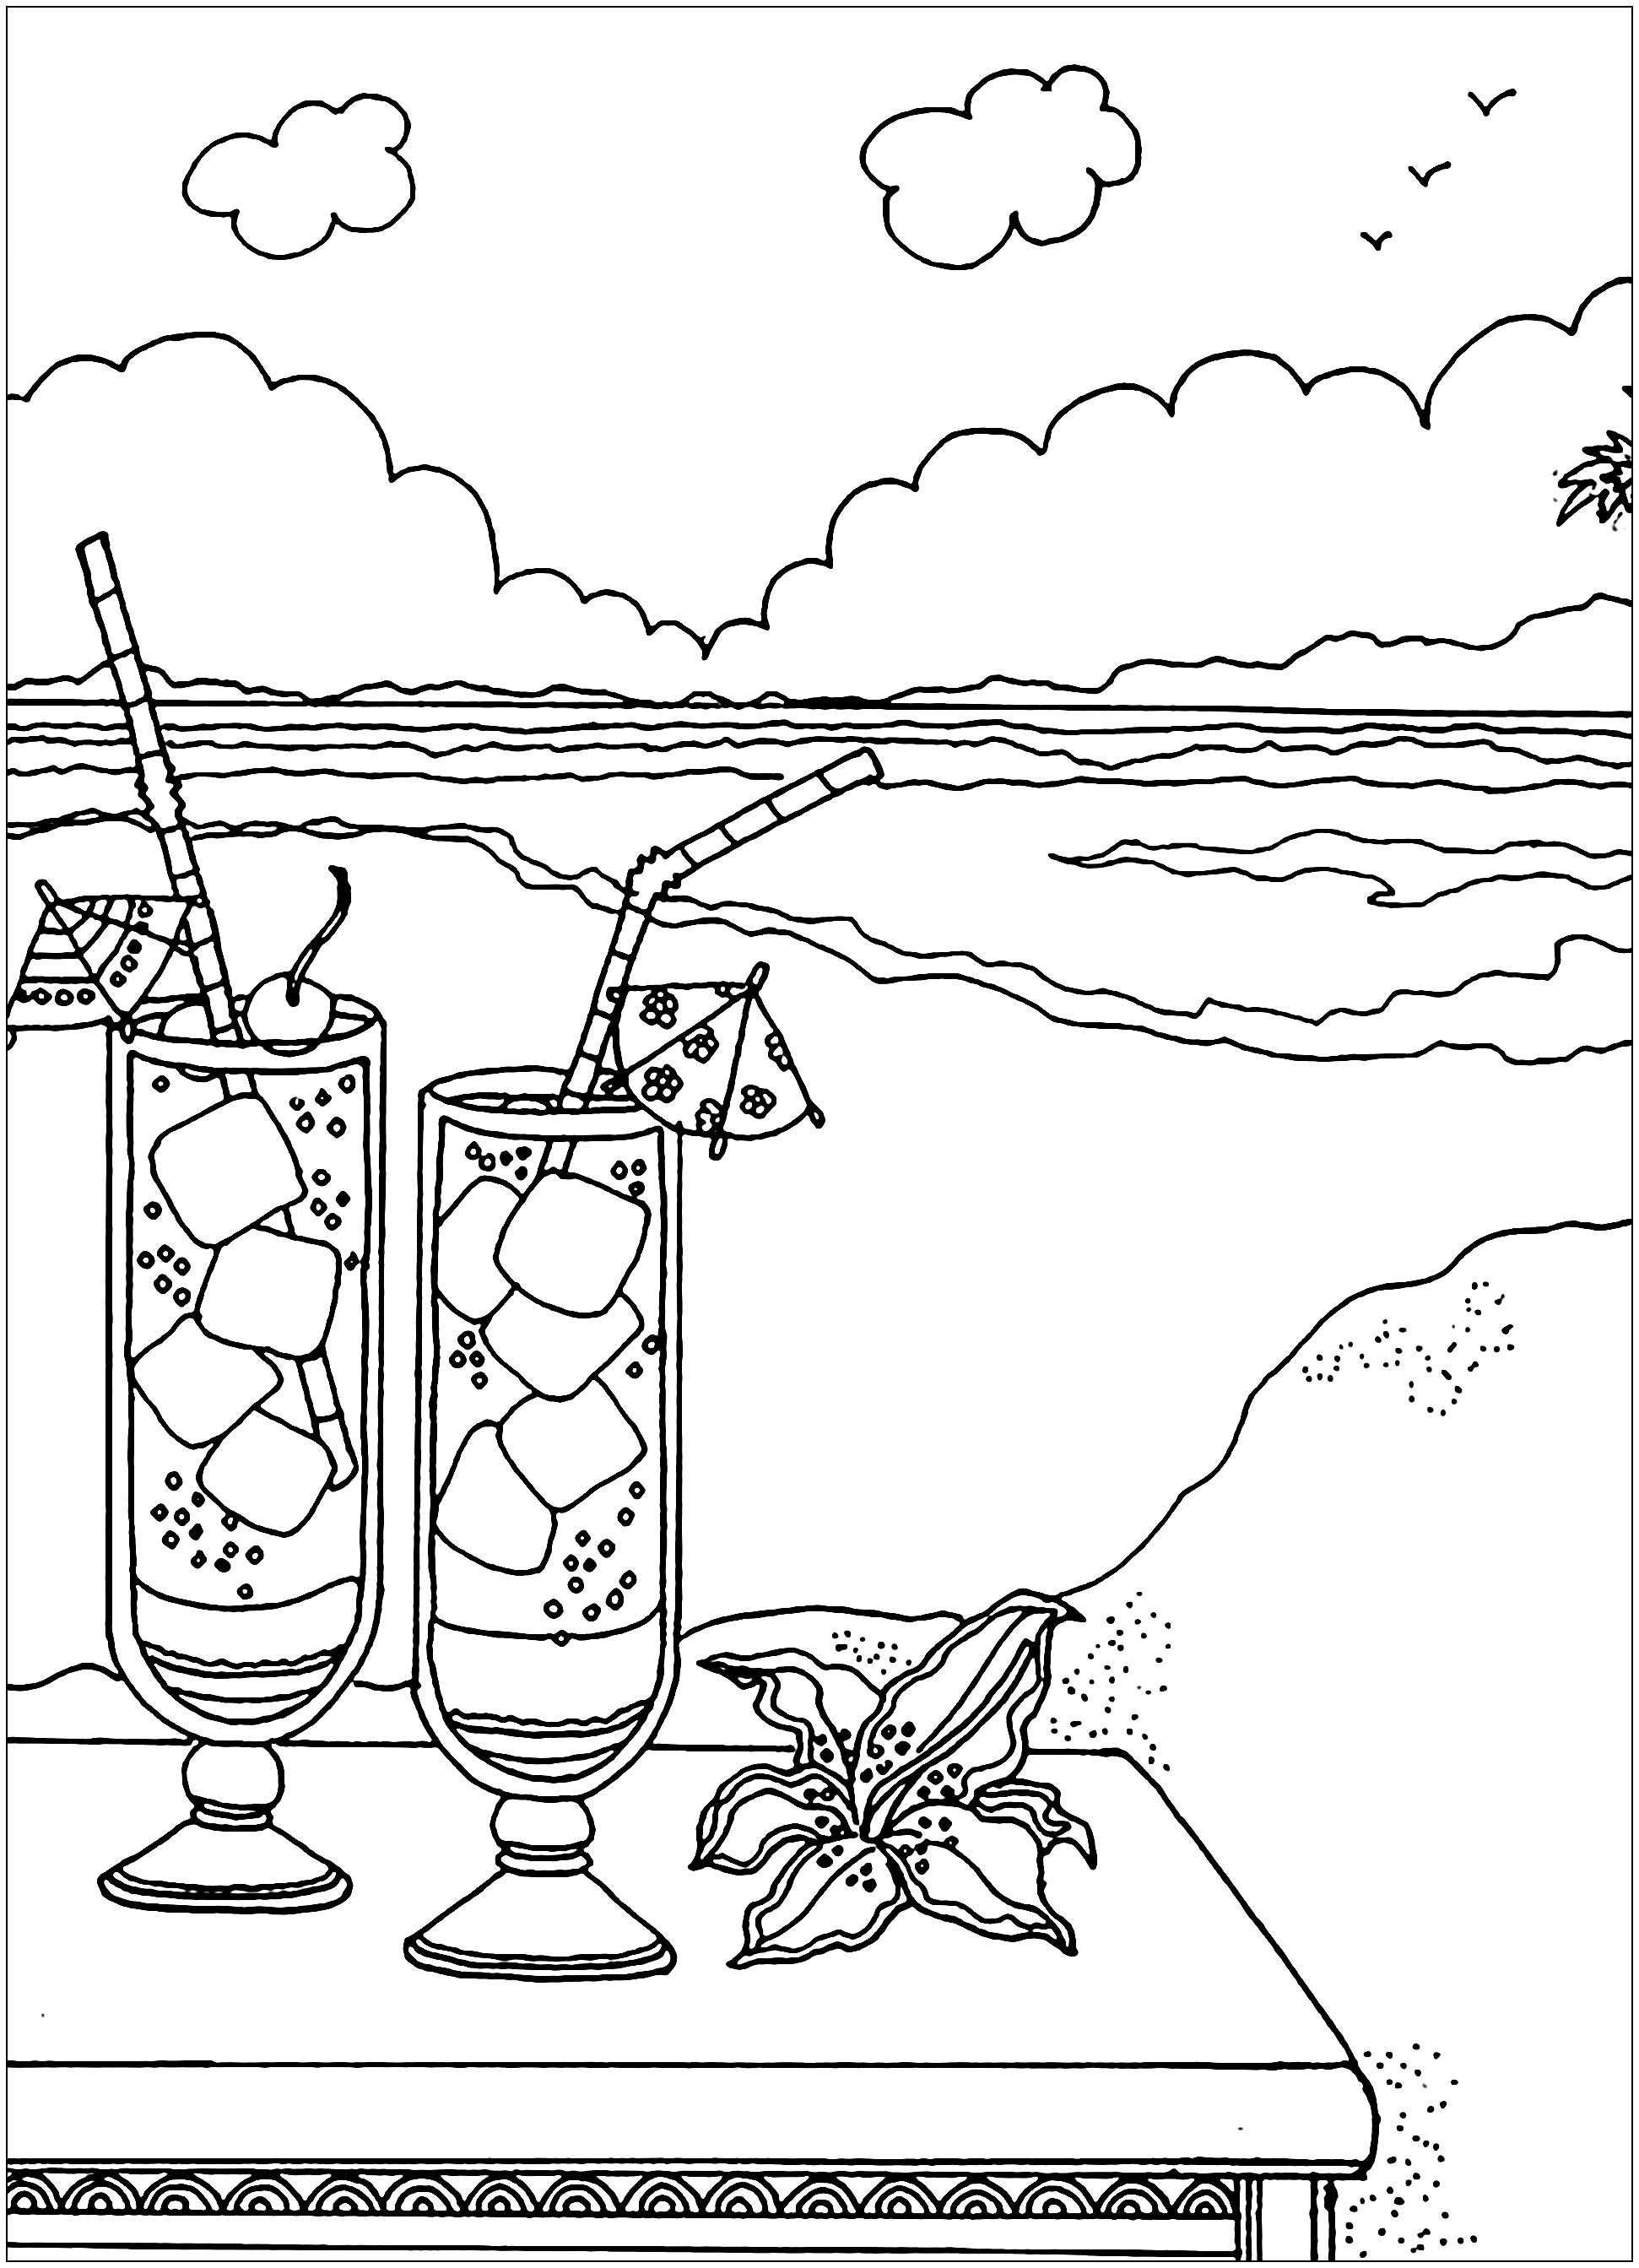 Do you want to drink these cocktails on the beach ?